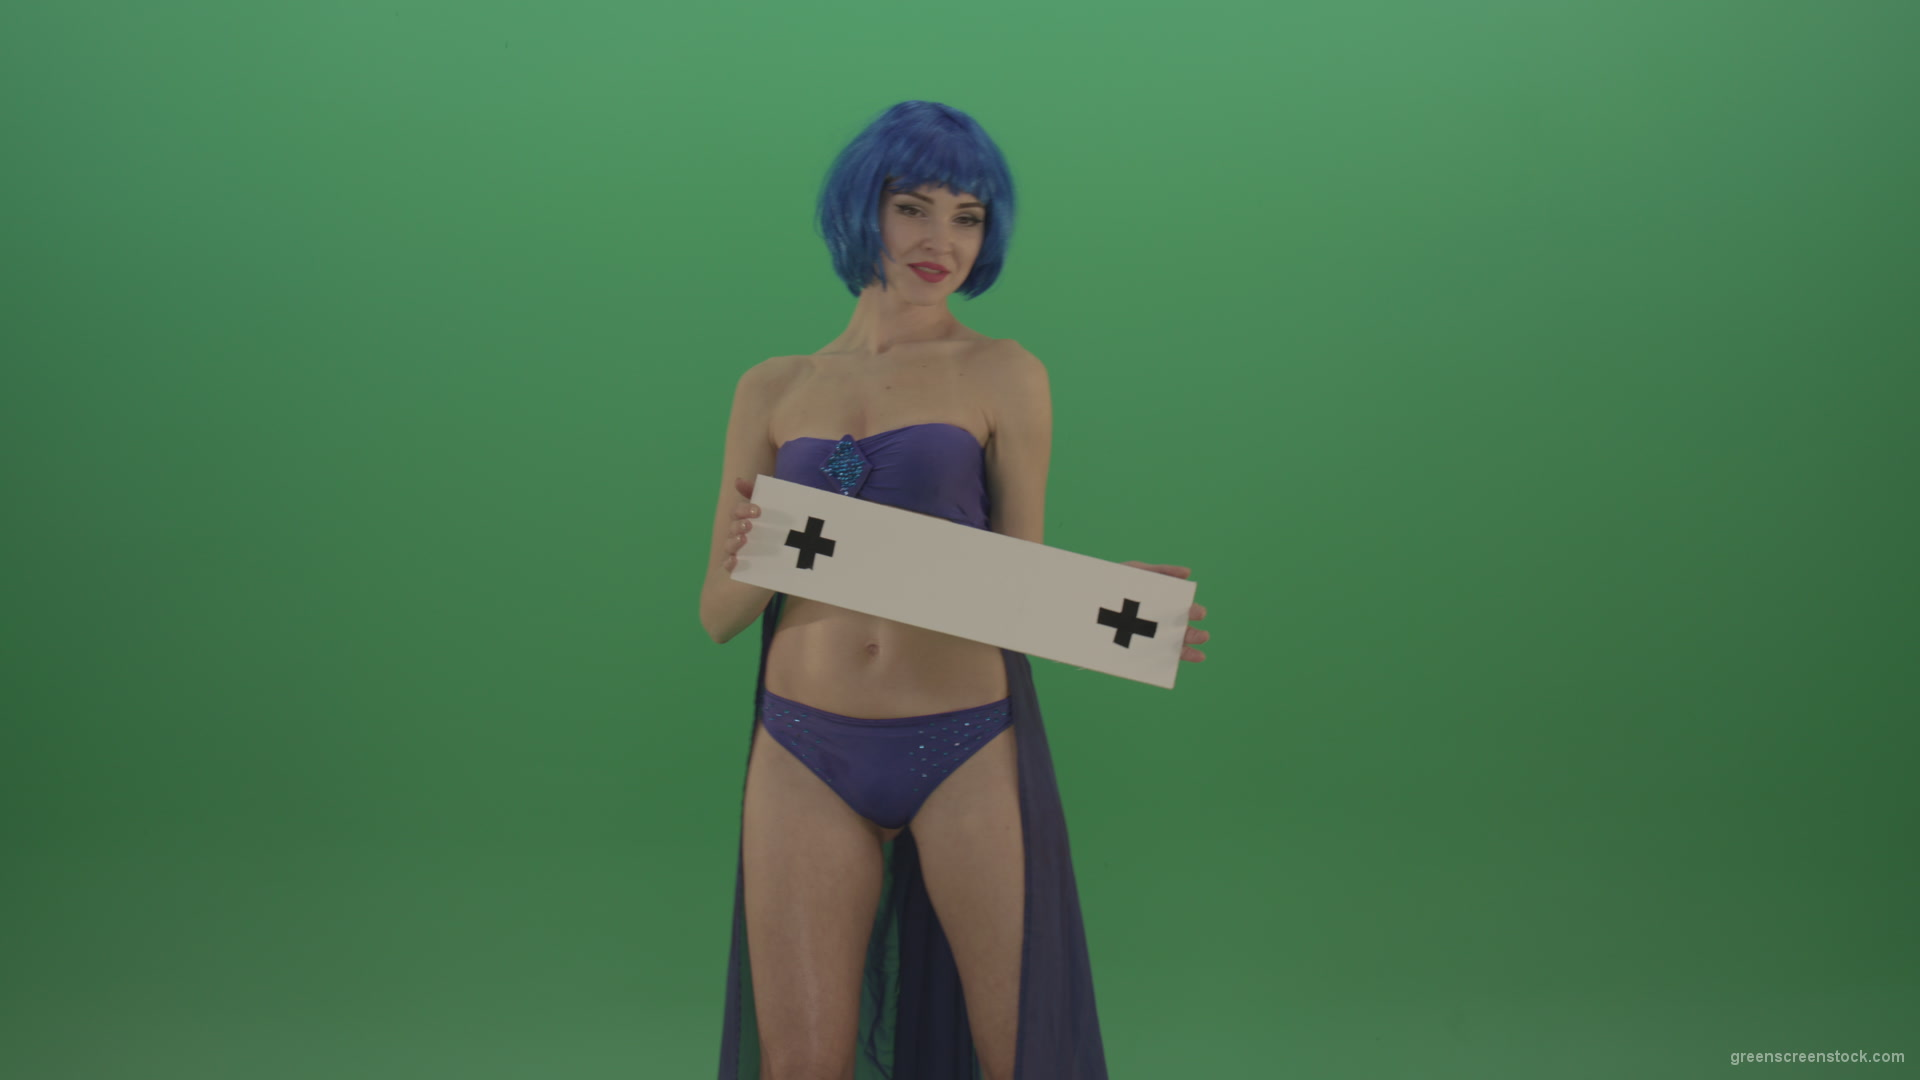 Blue-hair-elegant-naked-girl-posing-with-text-mockup-template-plane-on-green-screen_002 Green Screen Stock